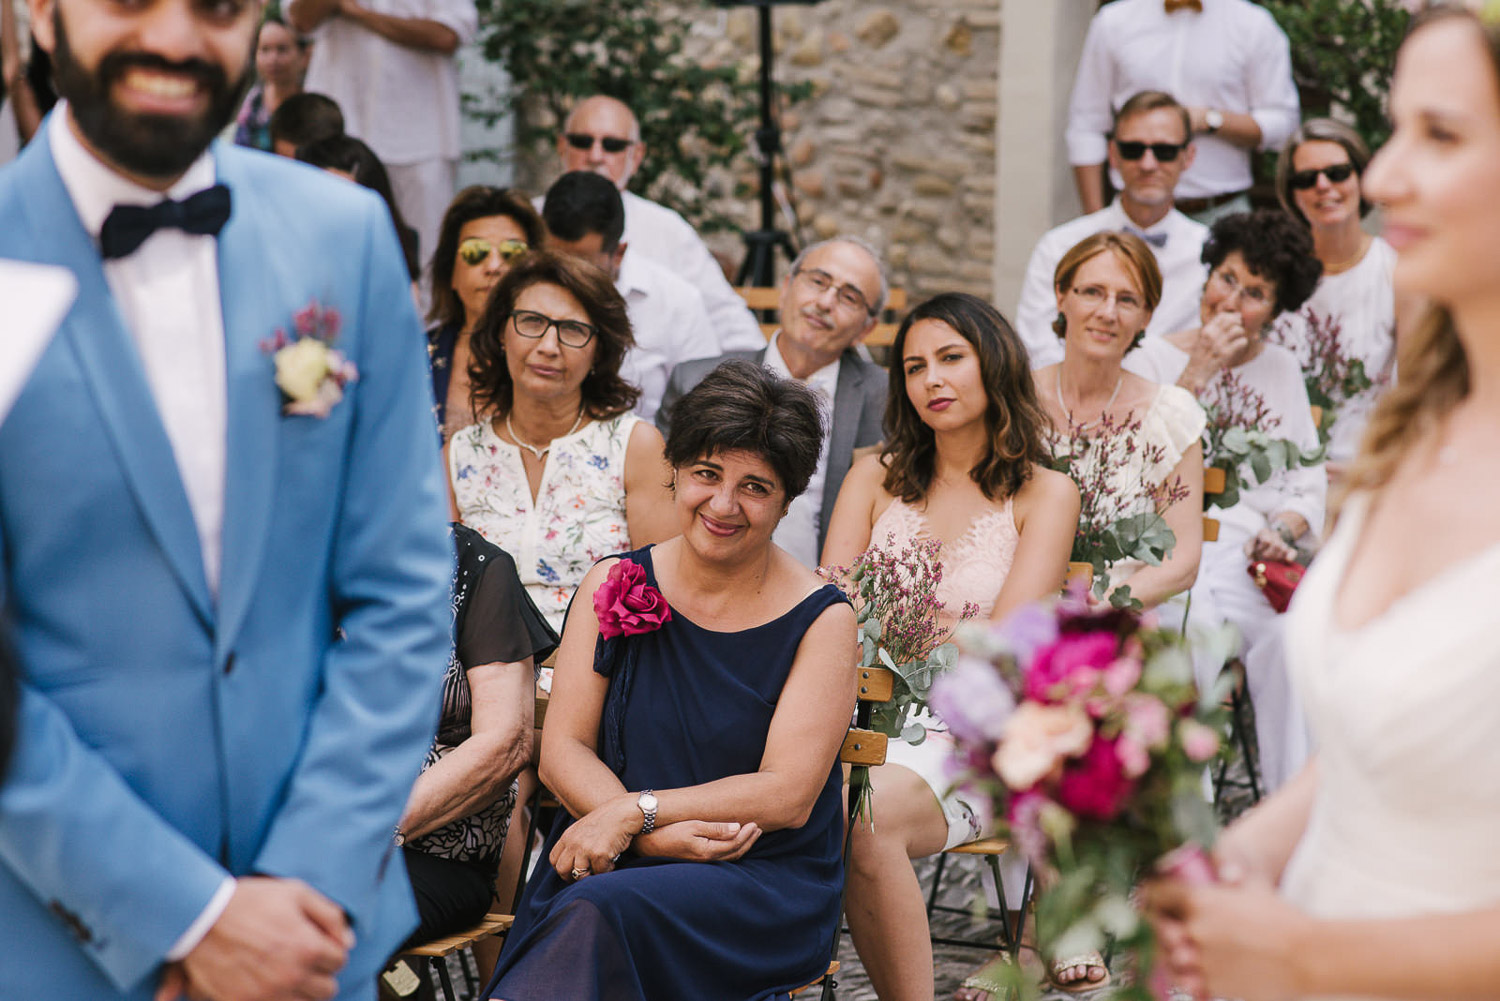 photographe mariage famille entreprise grenoble lyon annecy chambery mariage provence